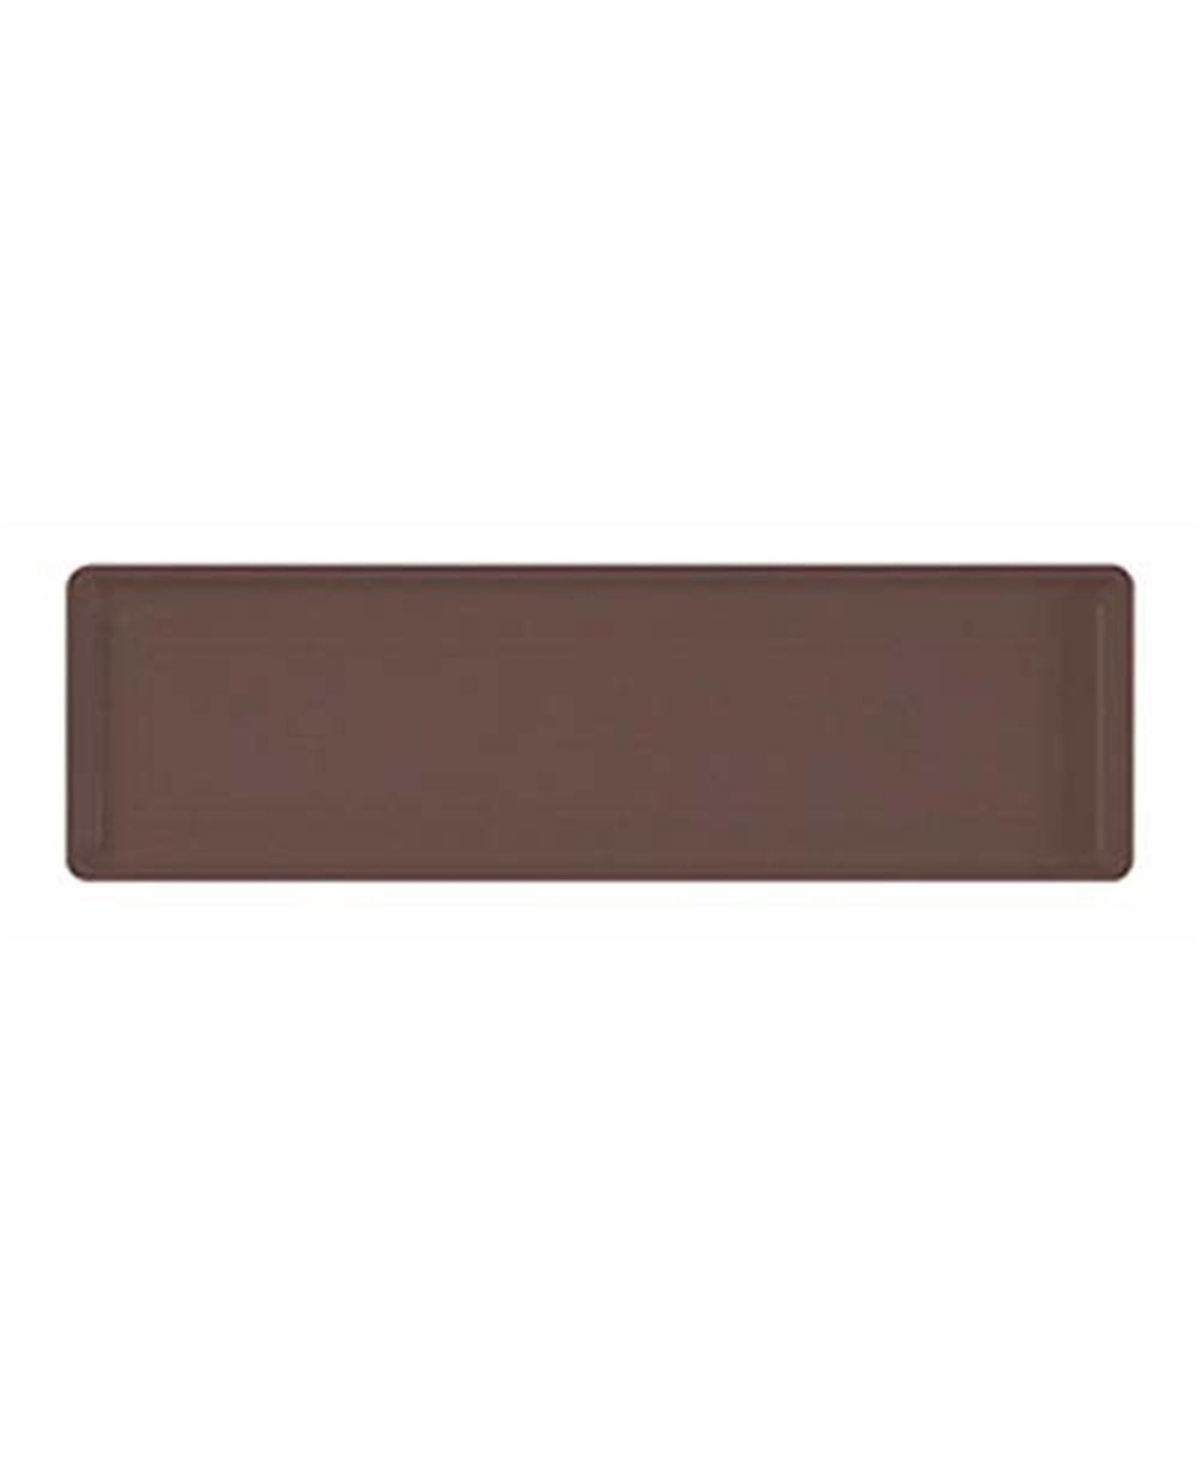 (#10303) Countryside Flower Box Tray, Chocolate Brown 30" - Brown